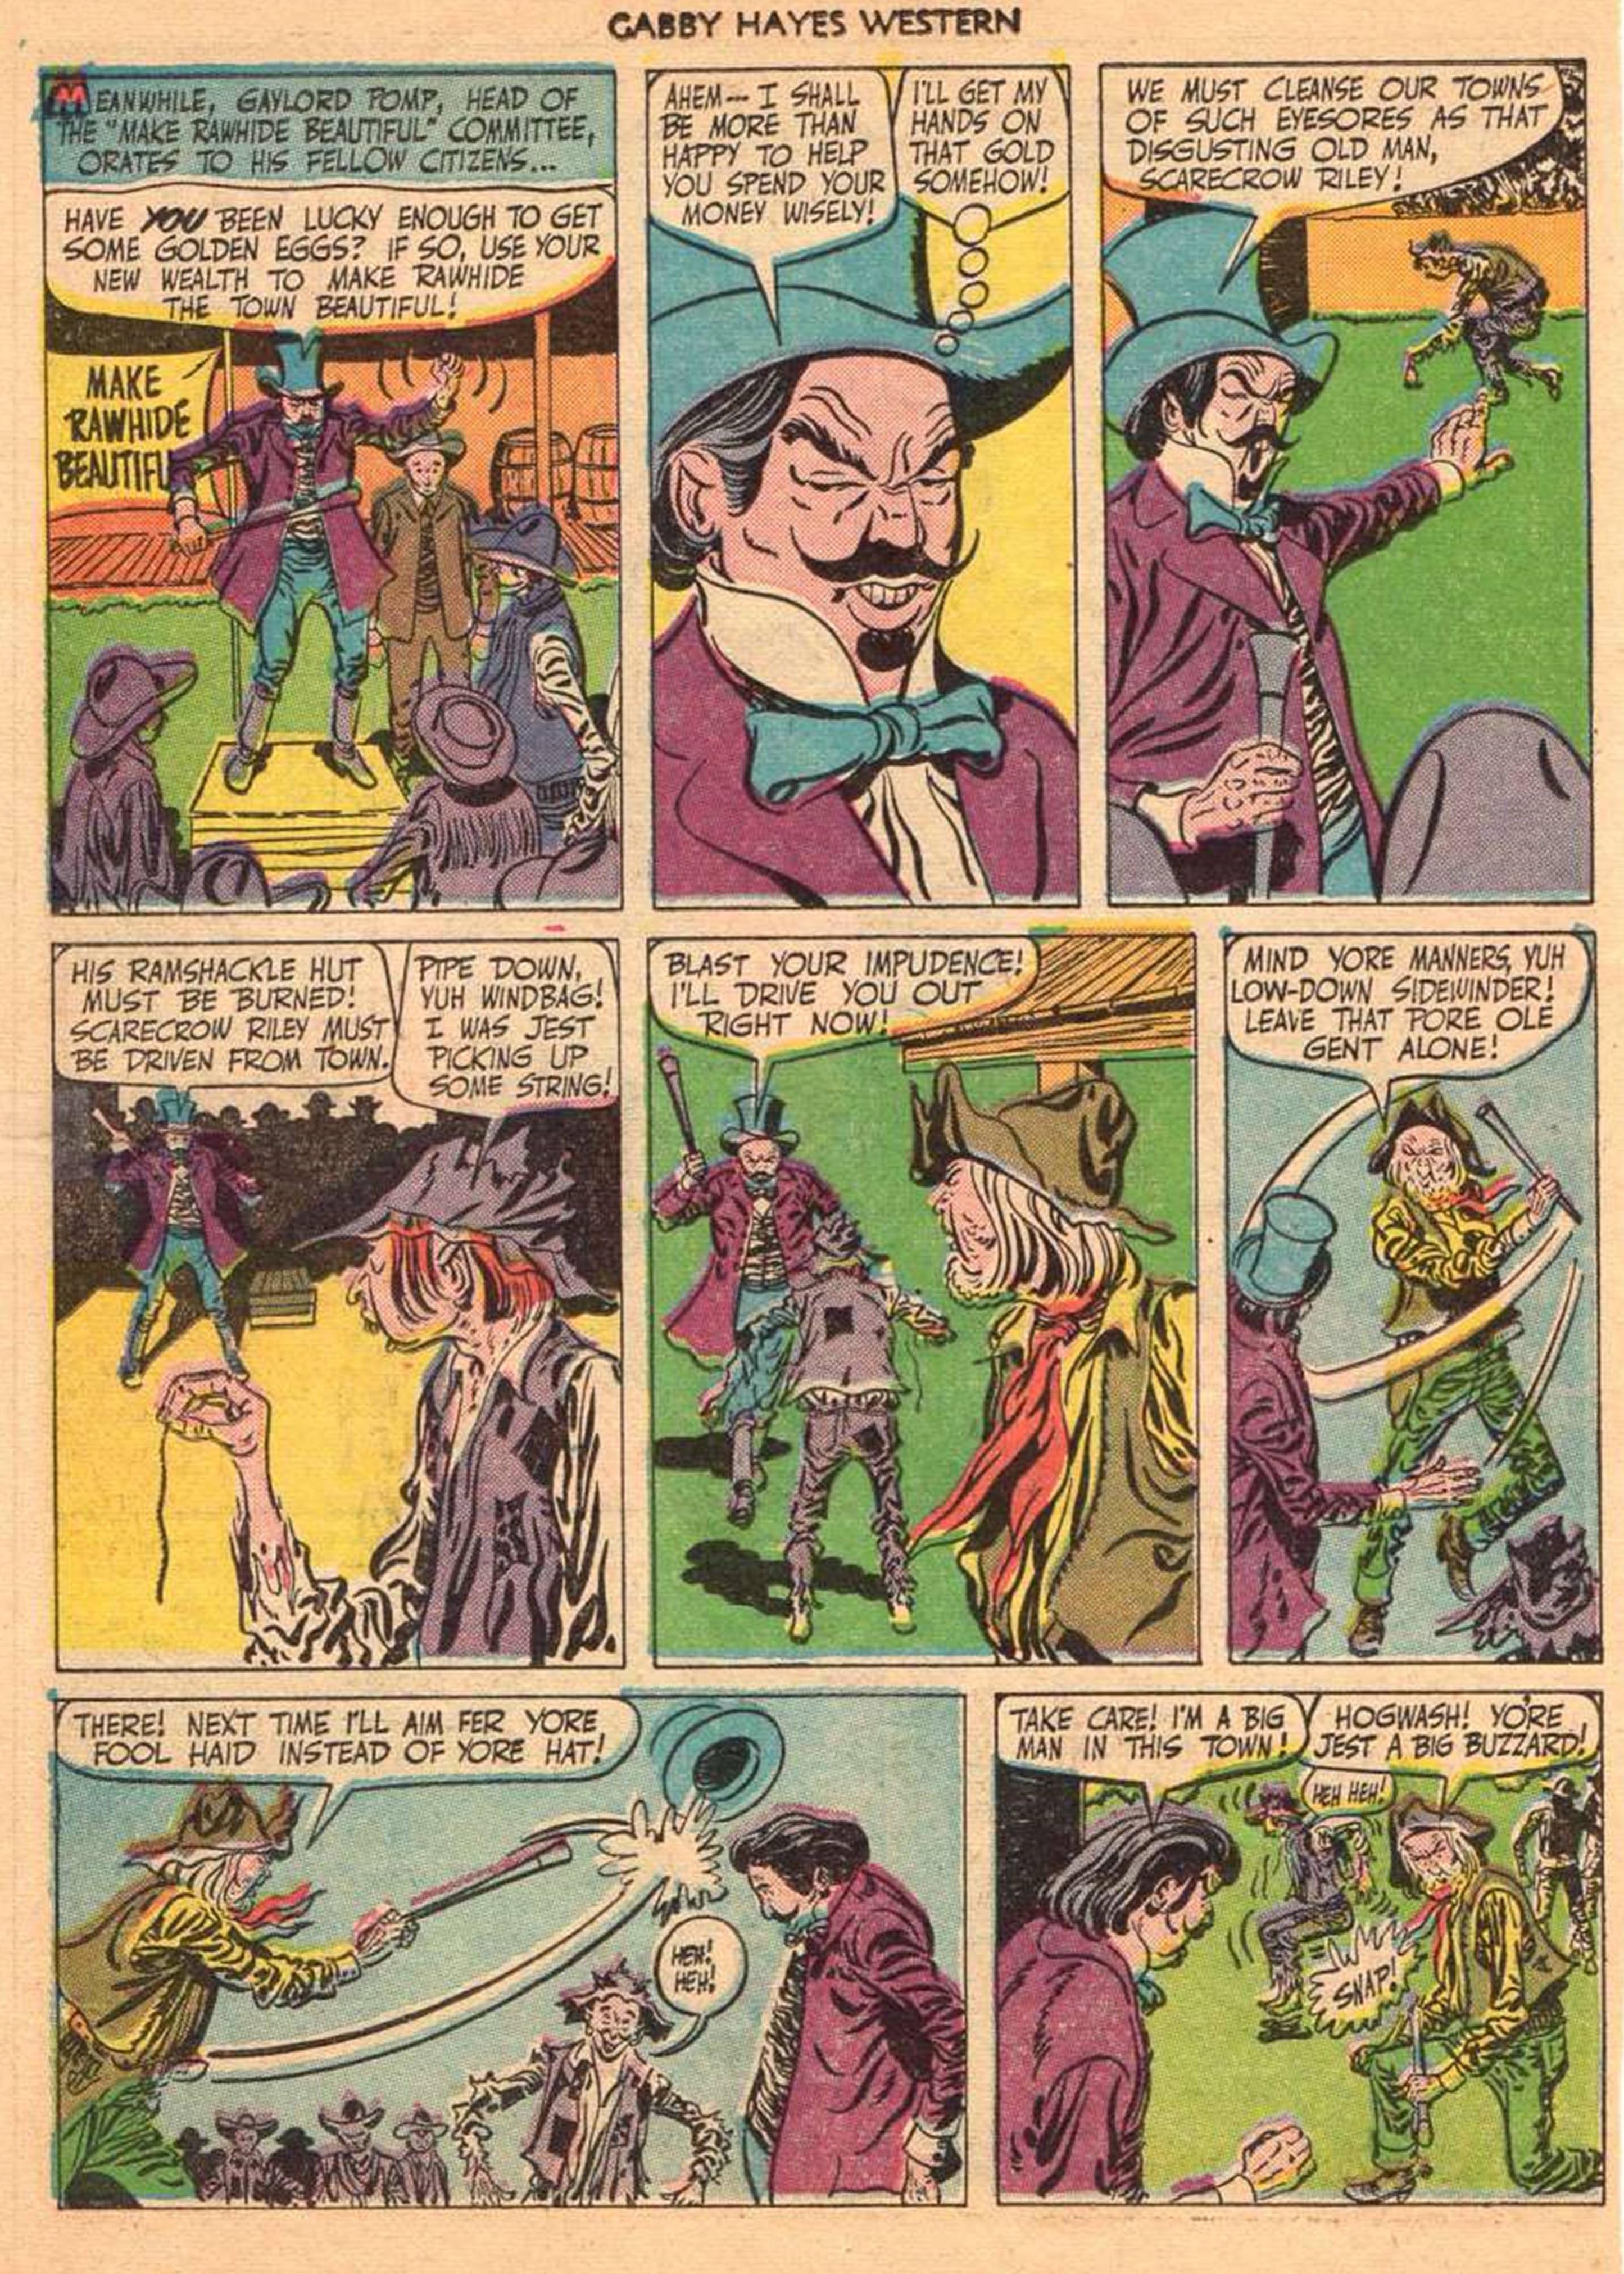 Read online Gabby Hayes Western comic -  Issue #24 - 42